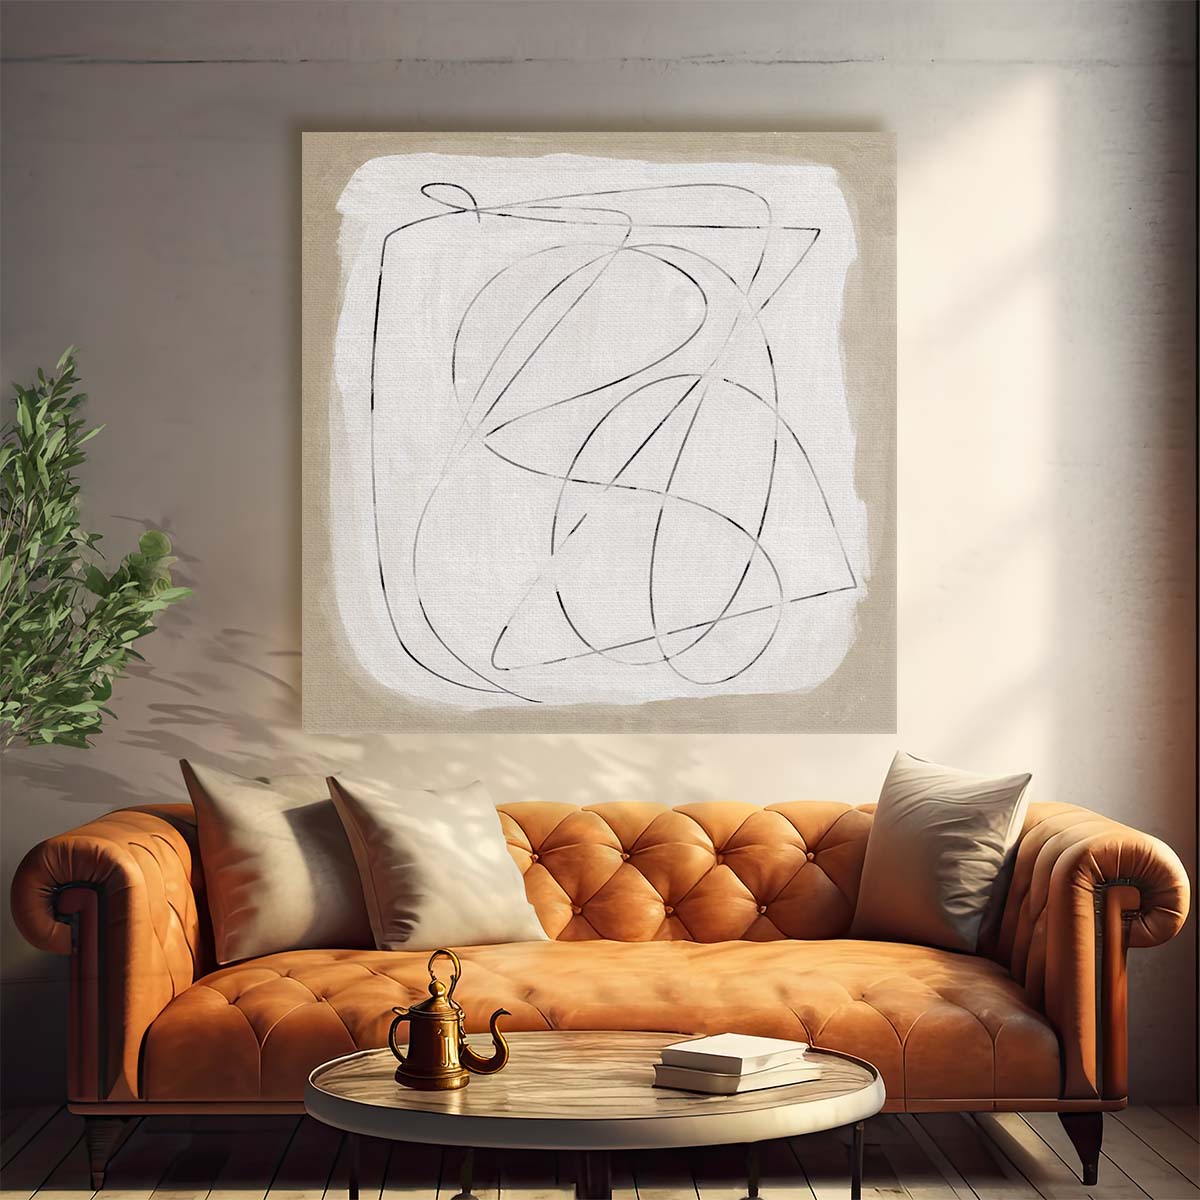 Dan Hobday Modern Geometric Abstract Painted Illustration Wall Art by Luxuriance Designs. Made in USA.